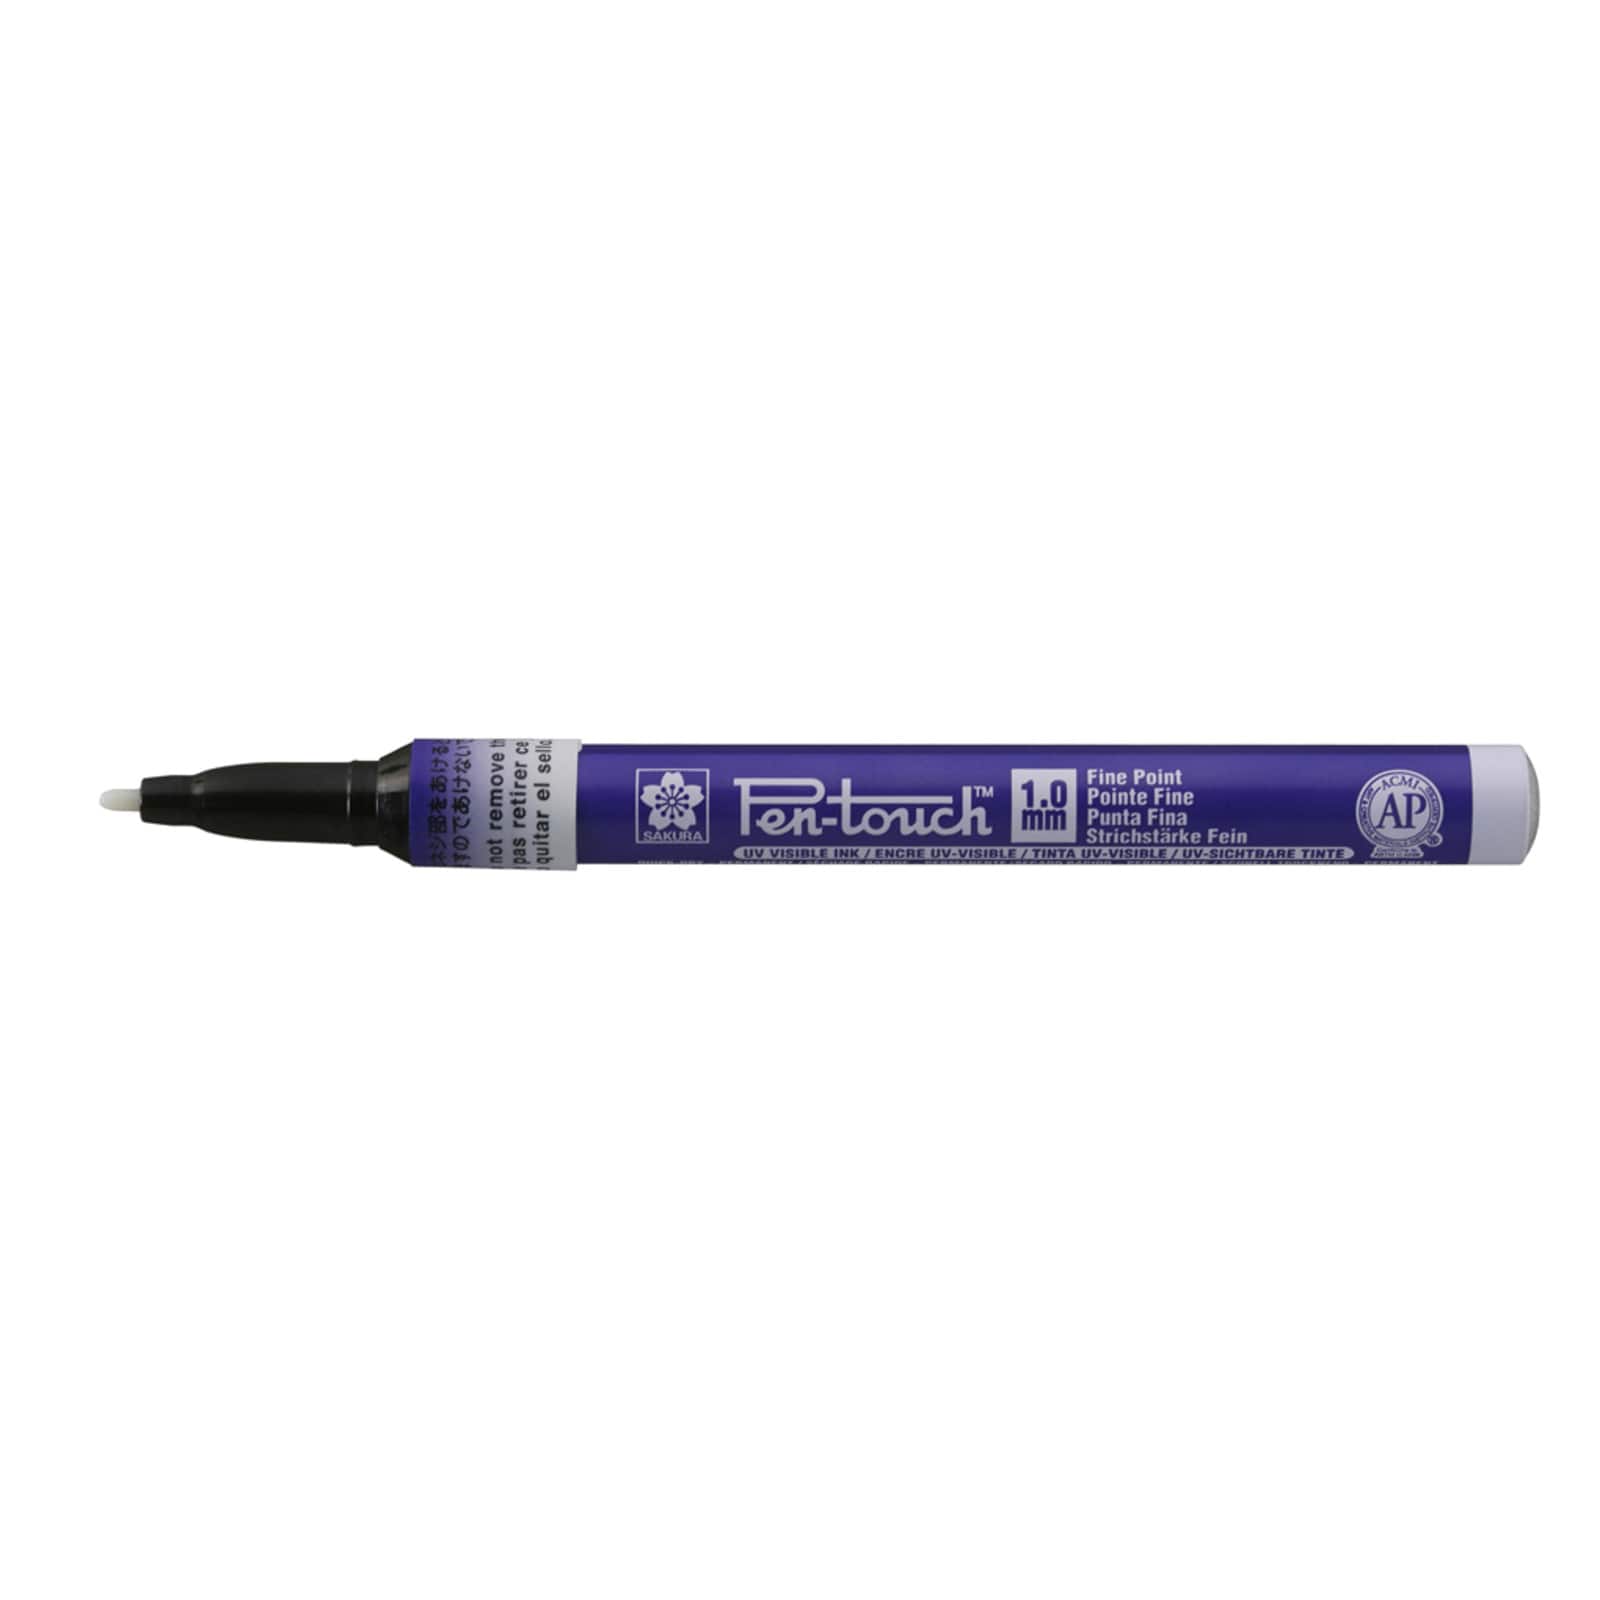 Dual clear uv blue pen and black marker